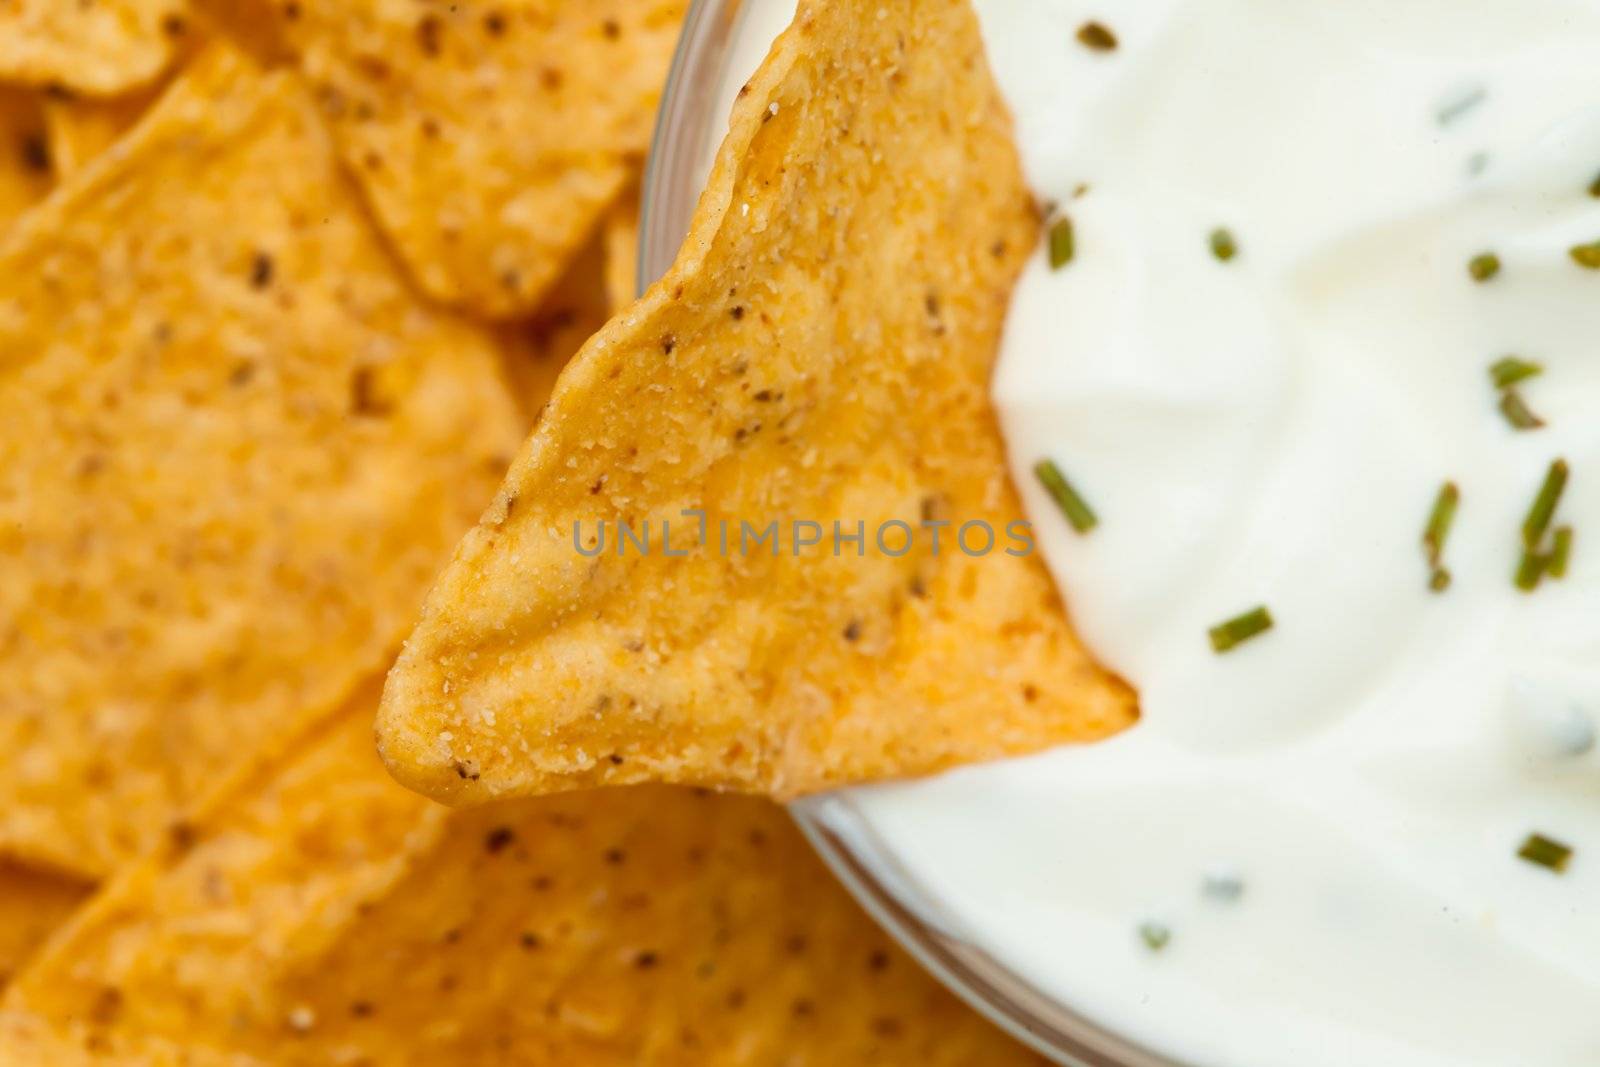 Close up of a nacho dipped into a bowl of dip with herbs